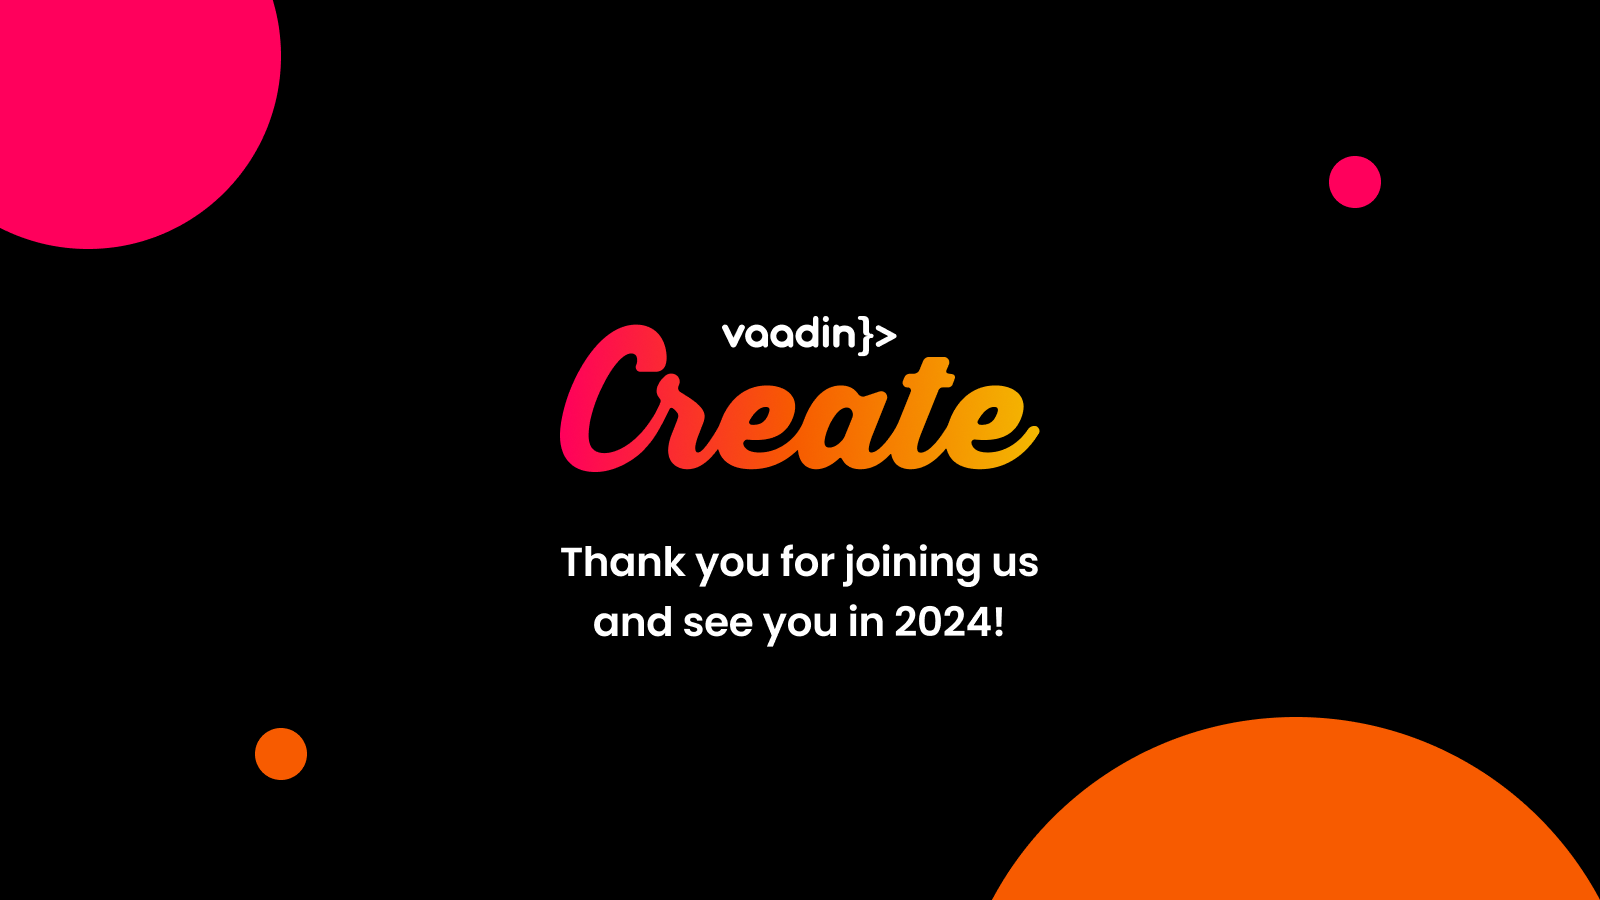 Thank you for joining us at Vaadin Create 2023. See you next year!